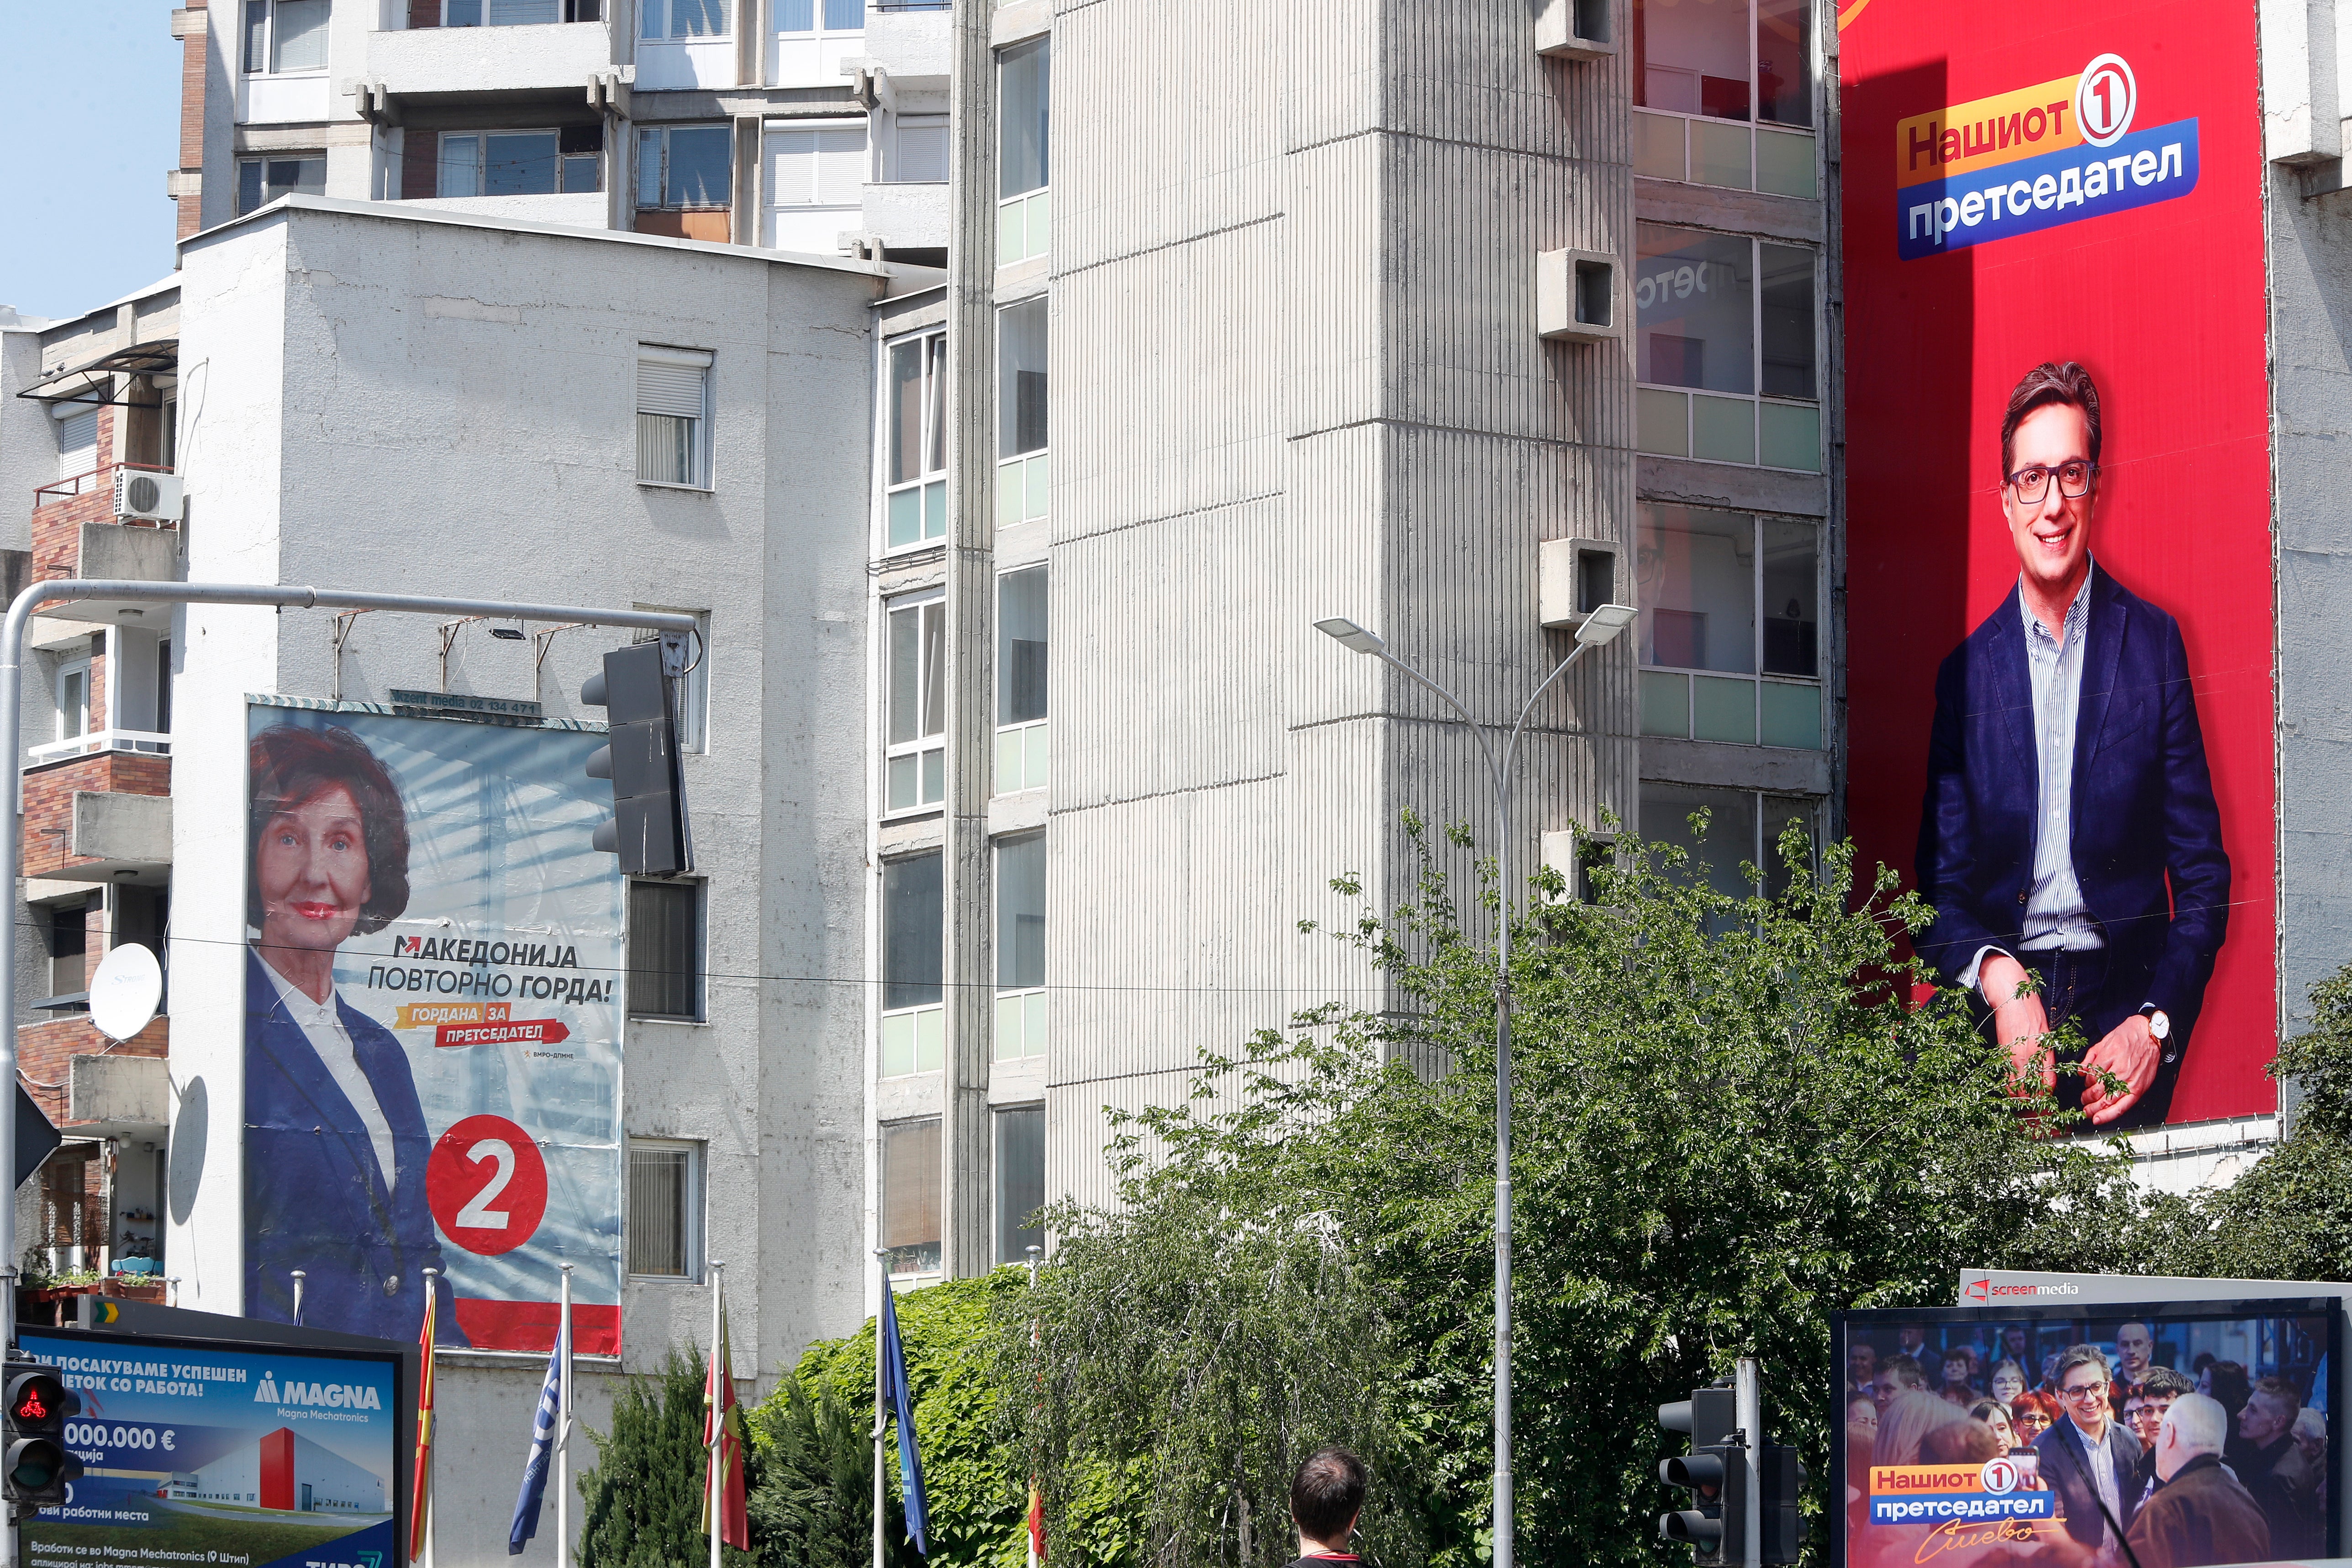 Giant posters of Gordana Siljanovska Davkova, the presidential candidate supported by the center-right main opposition VMRO-DPMNE coalition, left and Stevo Pendarovski, incumbent President and the presidential candidate backed by the ruling social democrats (SDSM), right, are hanging on a building in Skopje, North Macedonia, on Monday, May 6, 2024